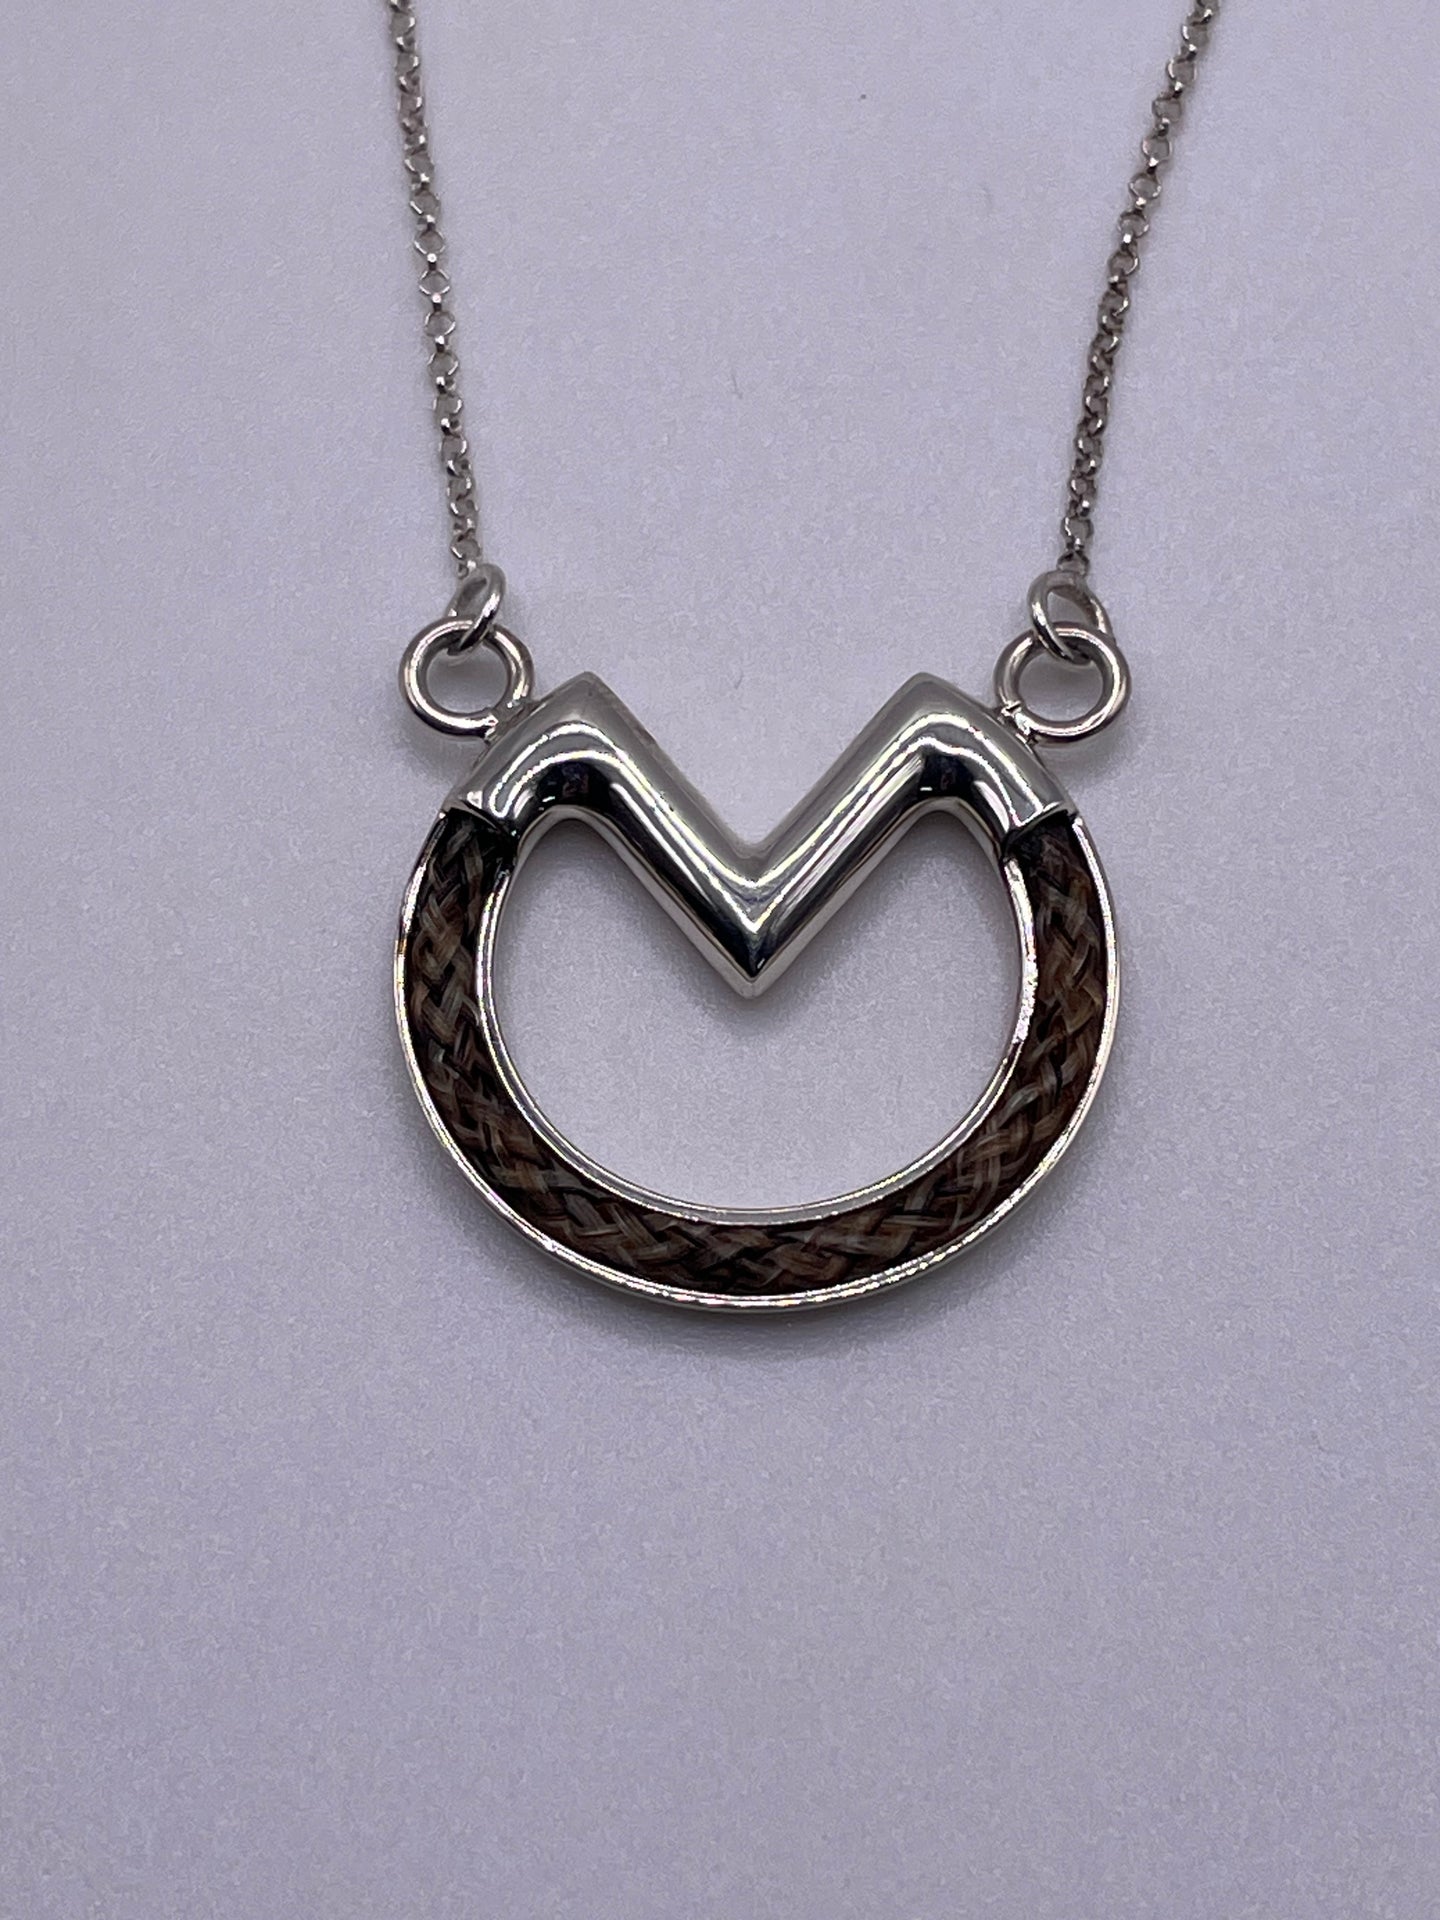 Hoofprint Necklace with chain